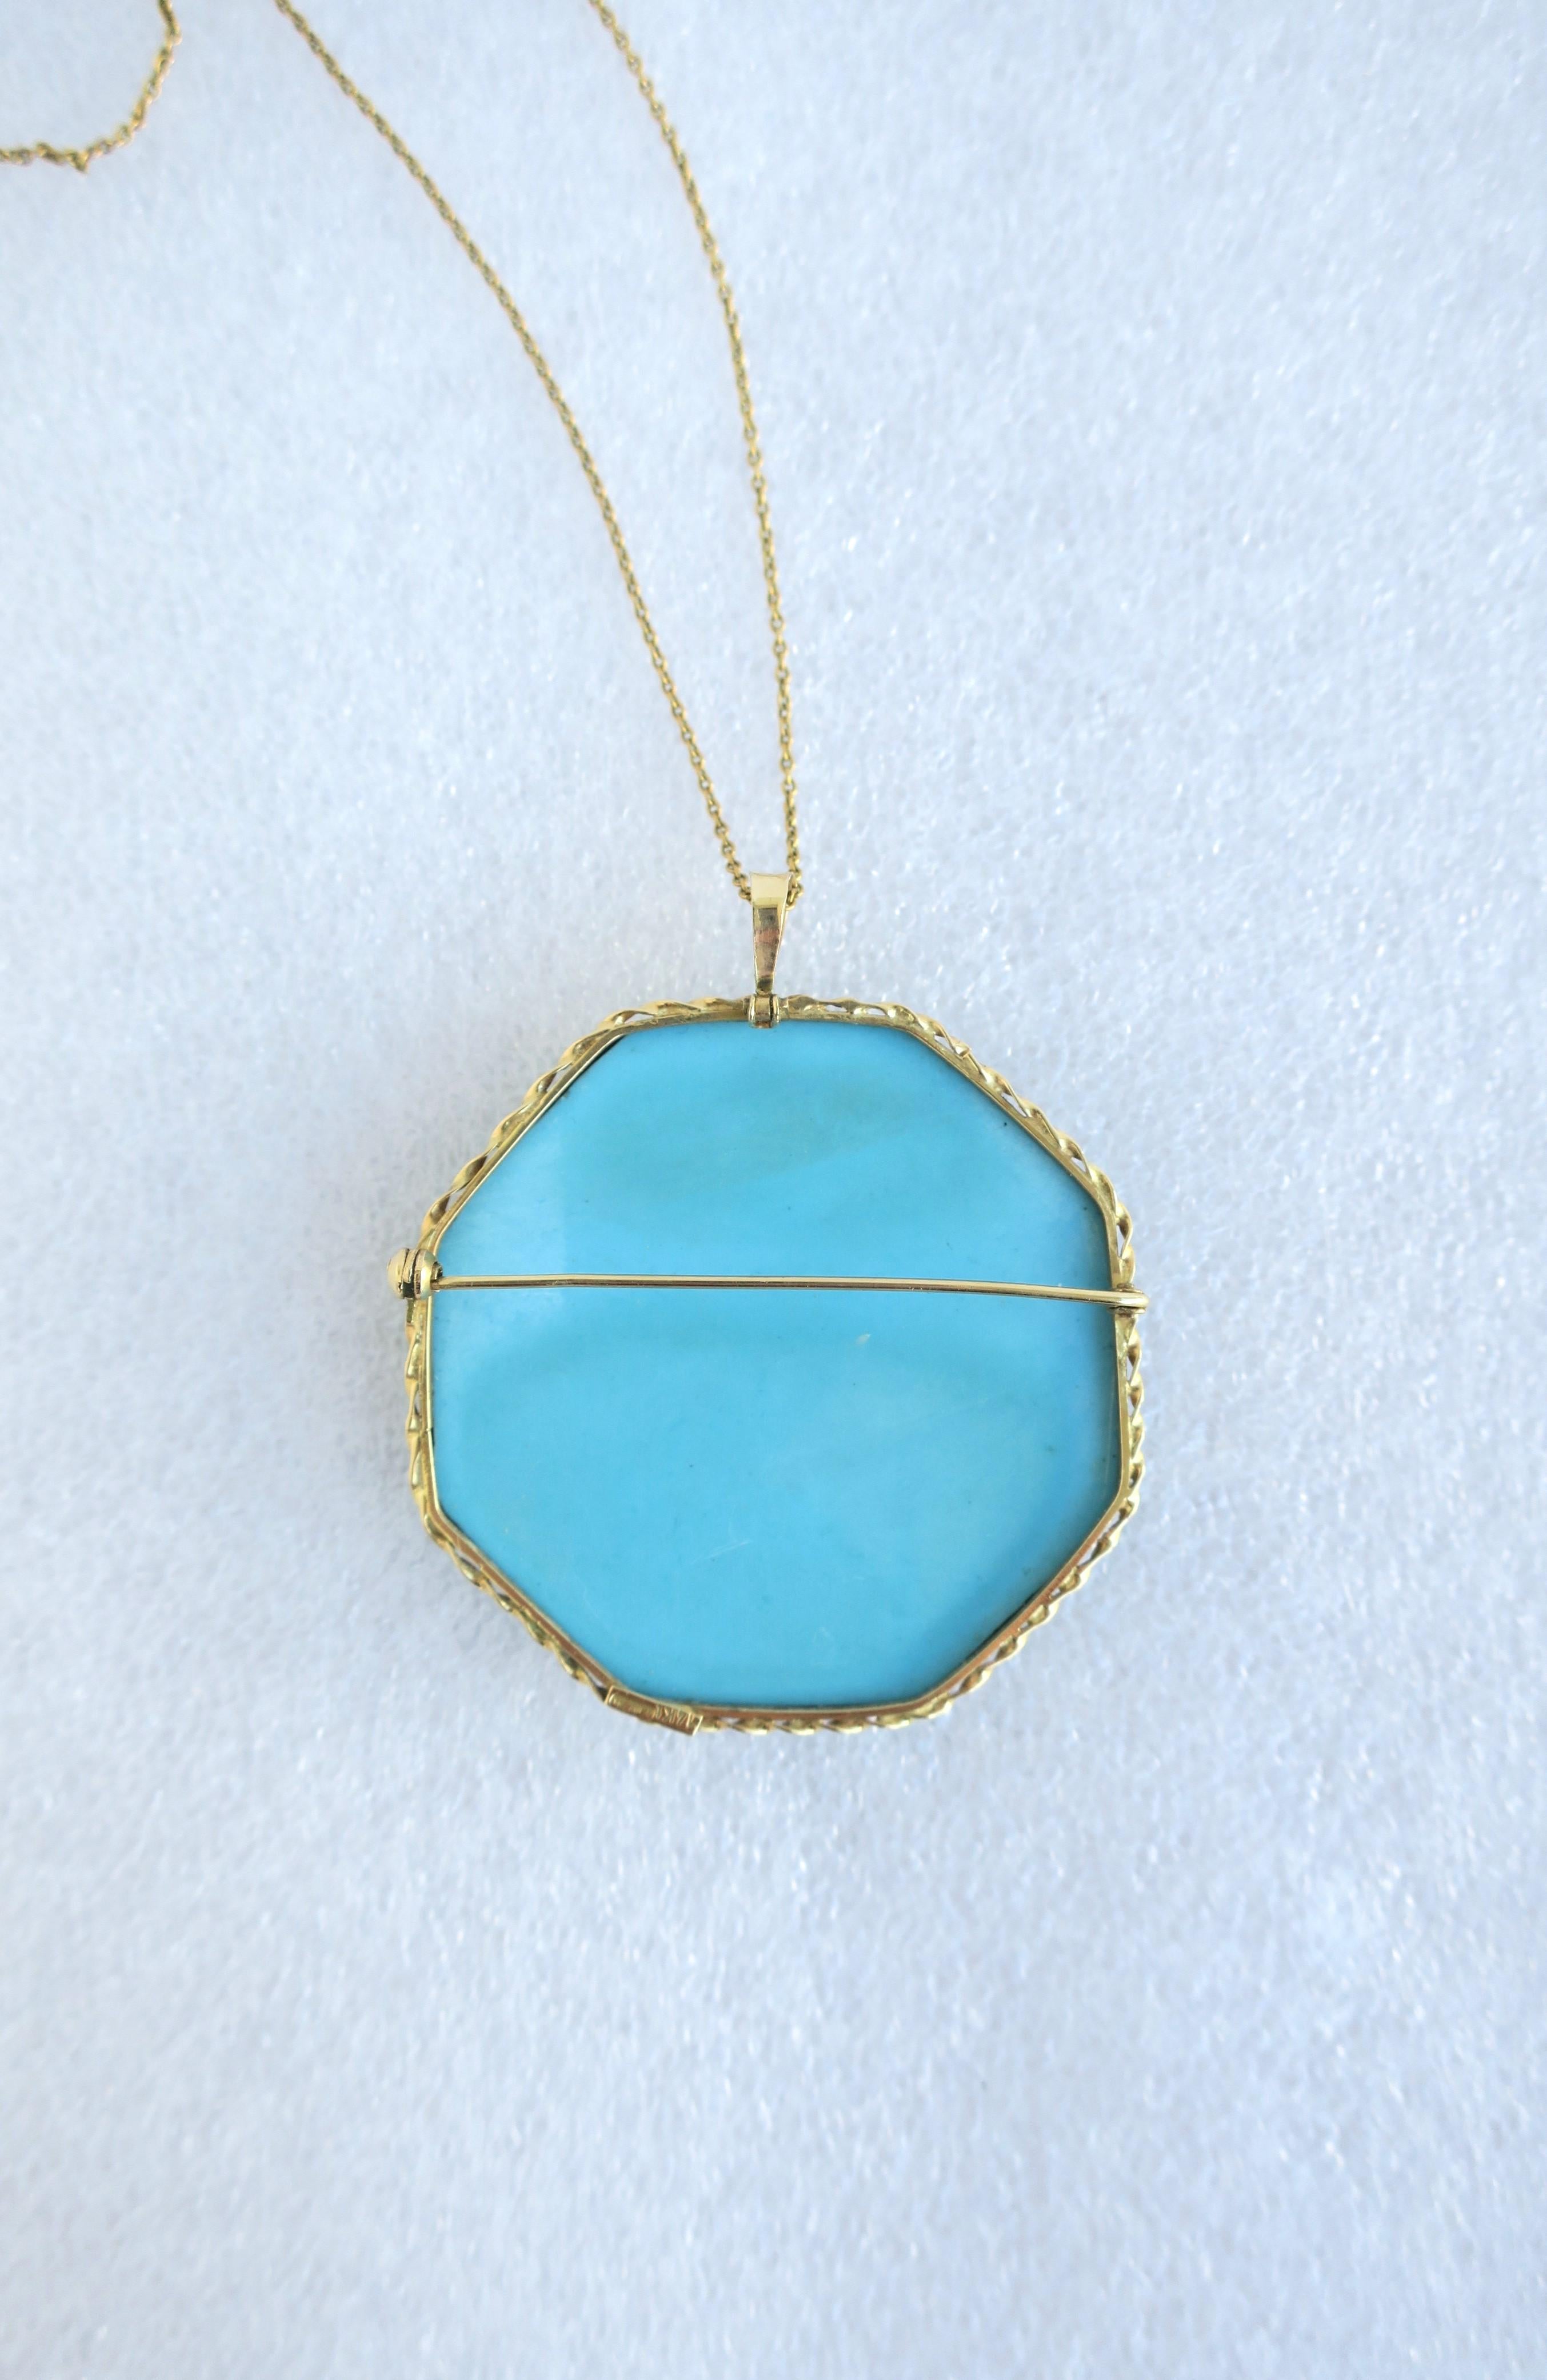 Italian Turquoise and 14-Karat Gold Pendant Necklace and Brooch Buccellati Style 13